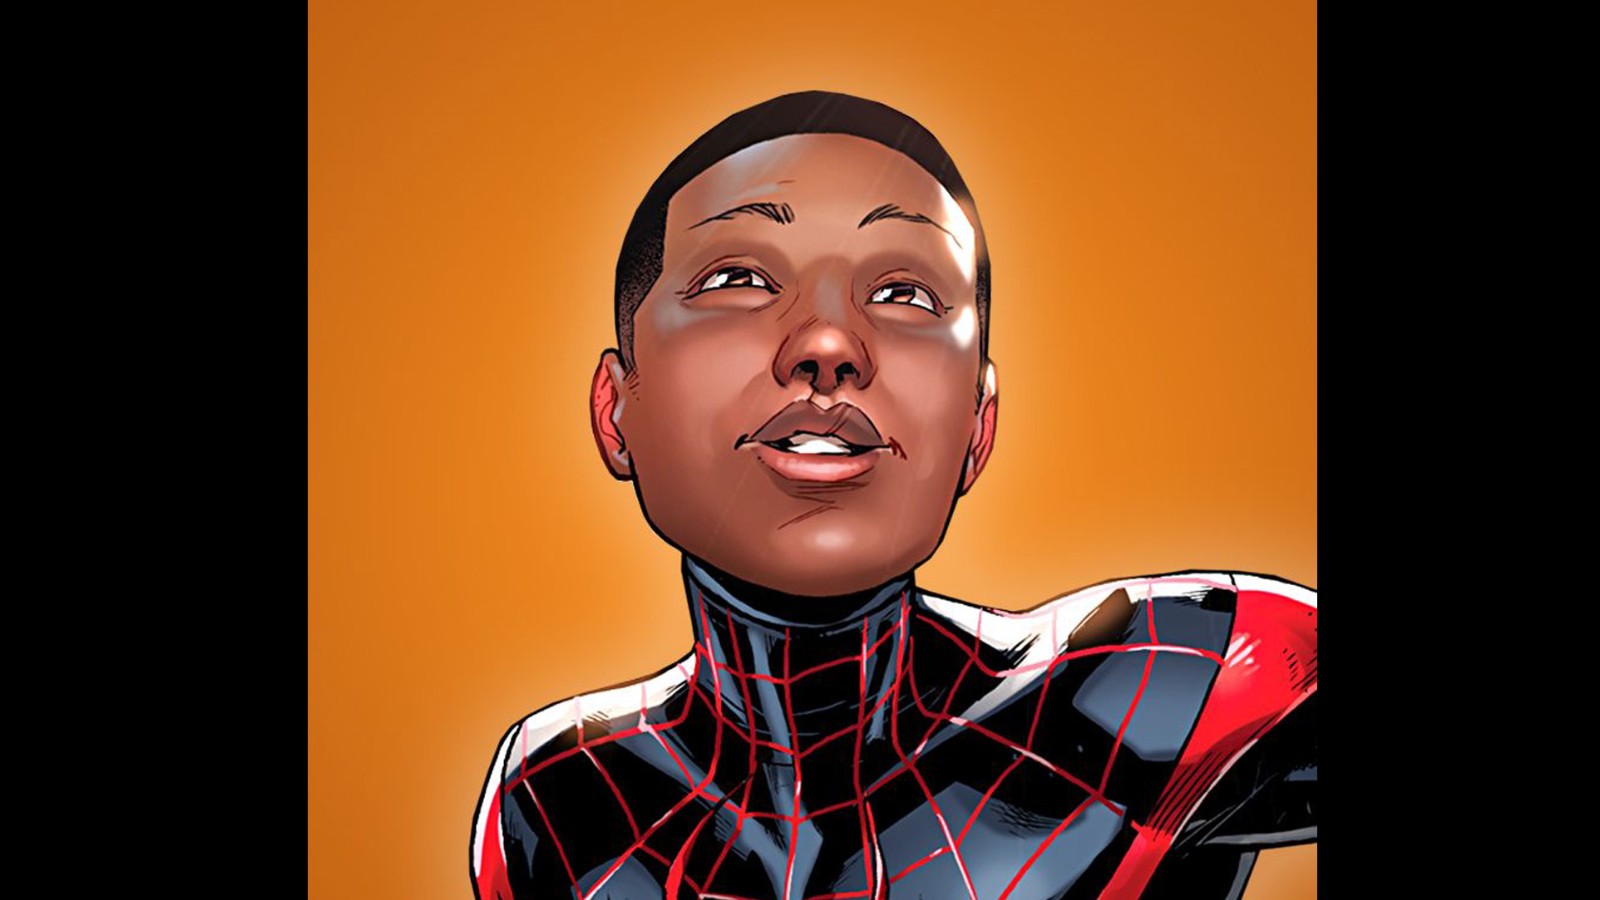 Miles Morales is the new Spider-Man, not Peter Parker - CNN